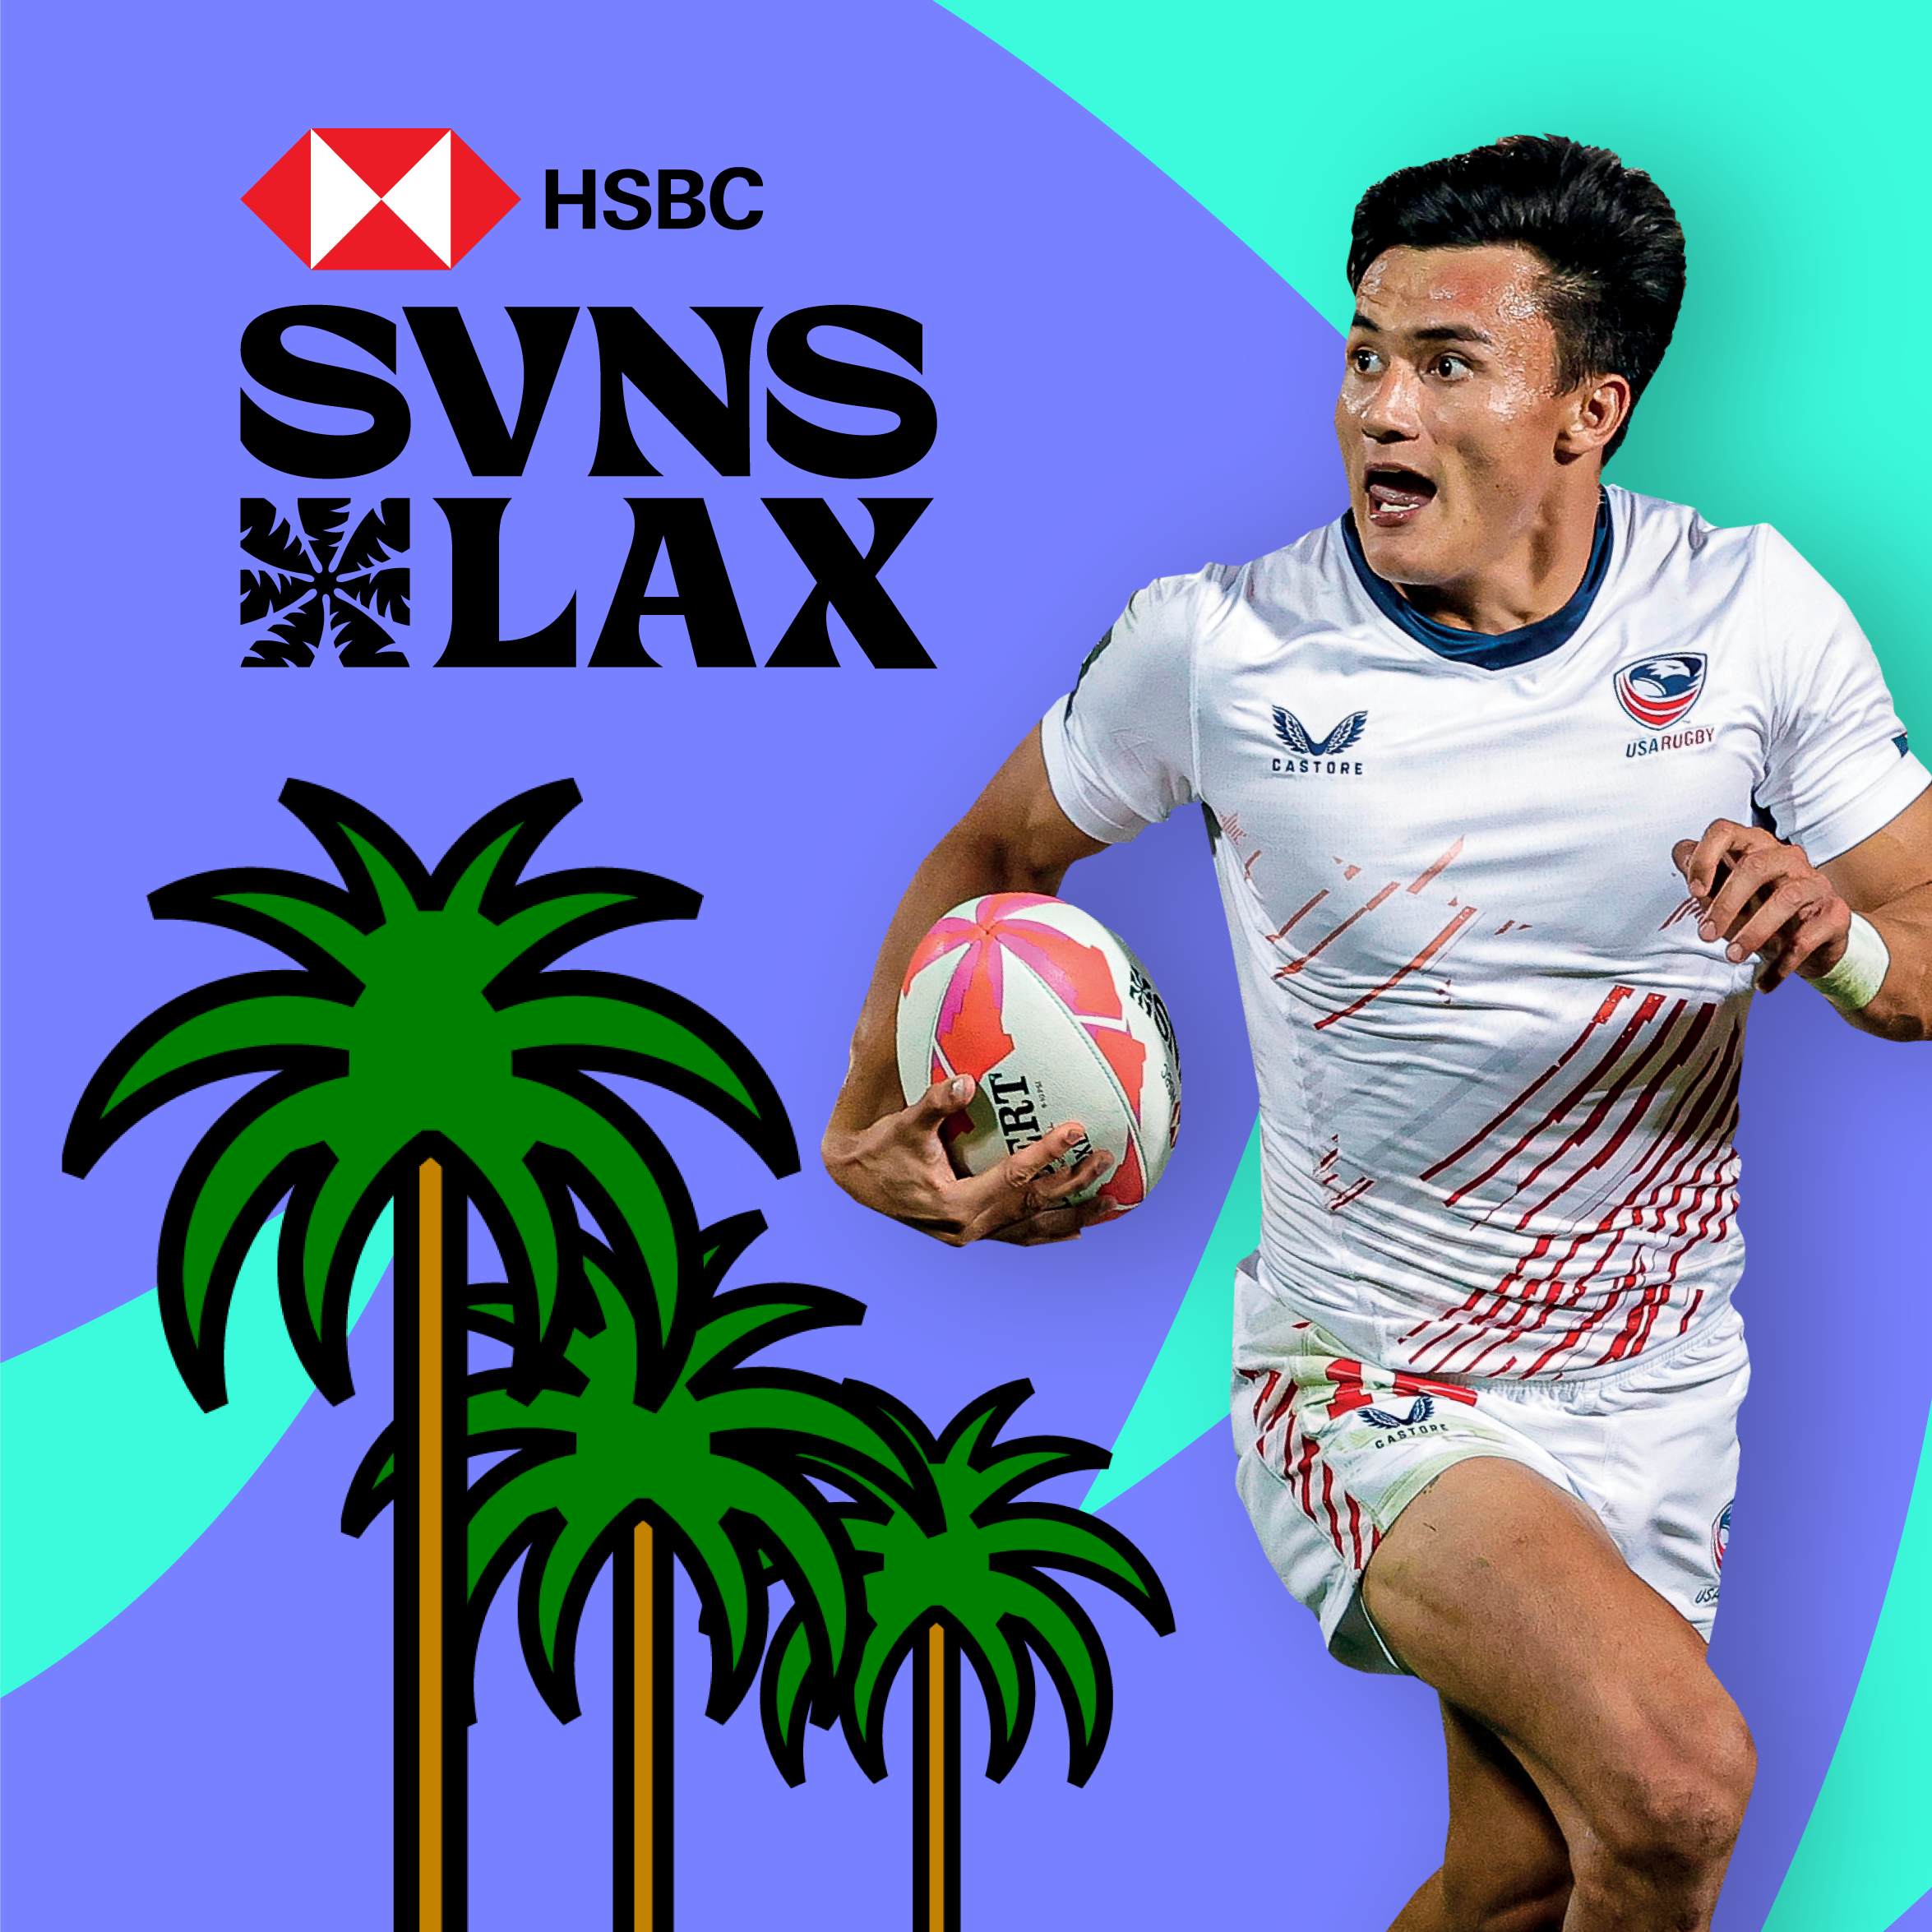 More Info for HSBC SVNS LAX expands the sevens experience with Friday Night Lights added to the weekend slate of events  